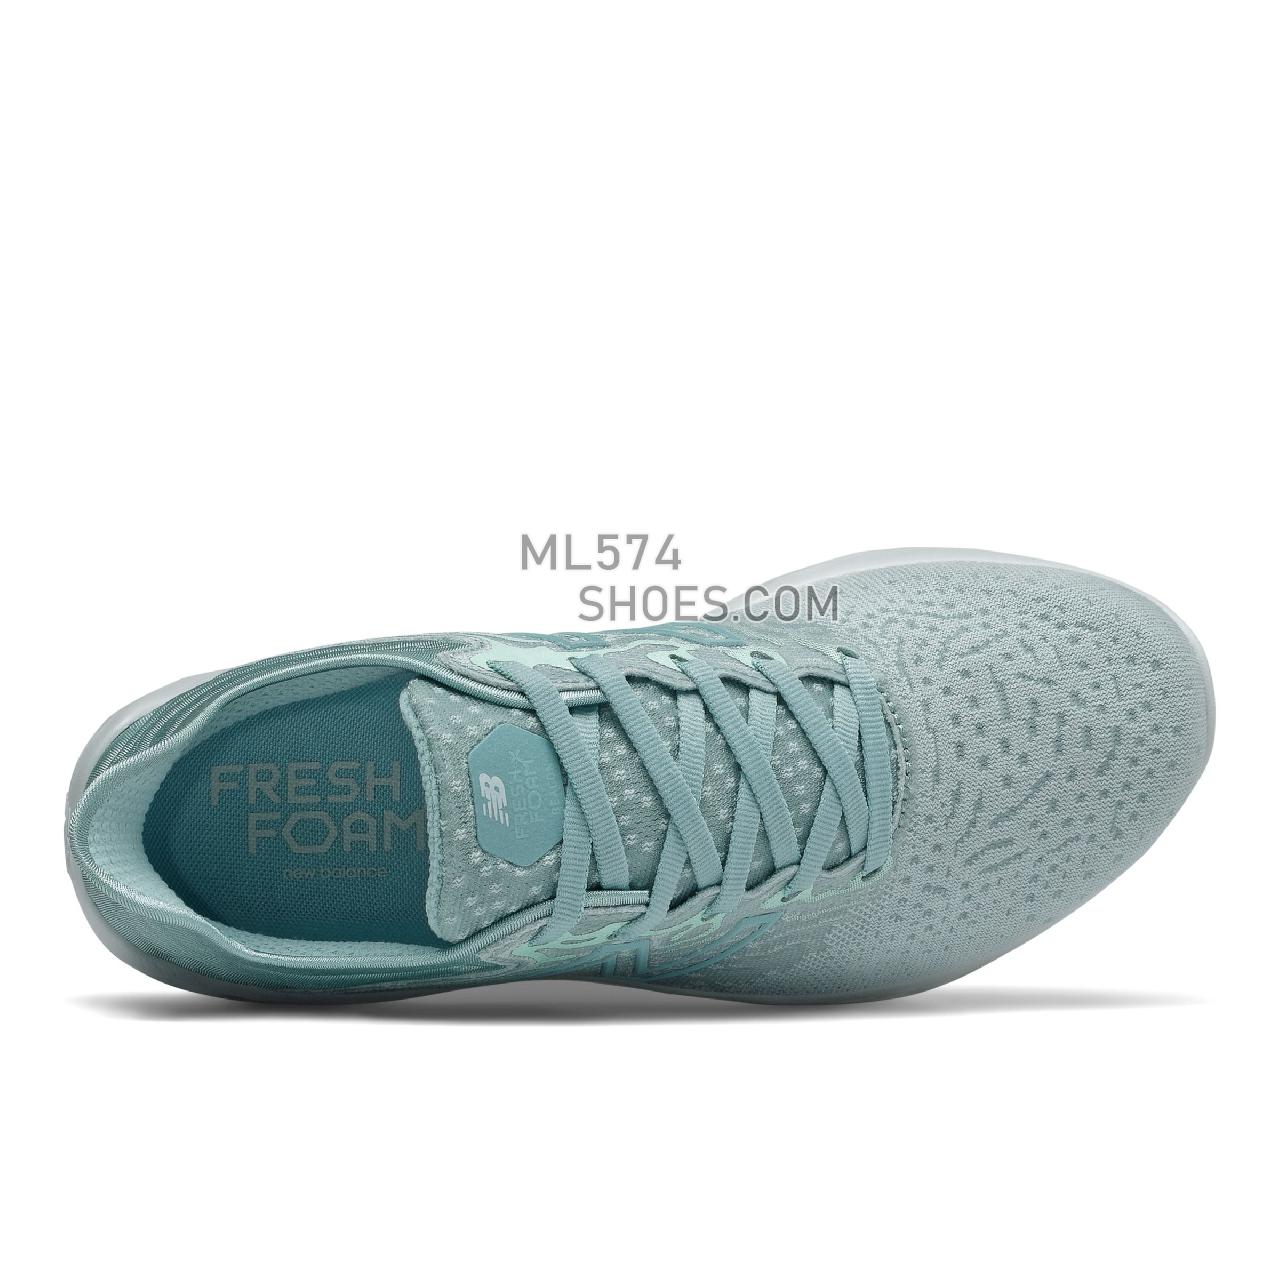 New Balance Fresh Foam Beacon v3 - Women's Neutral Running - Storm Blue with Glacier - WBECNLG3